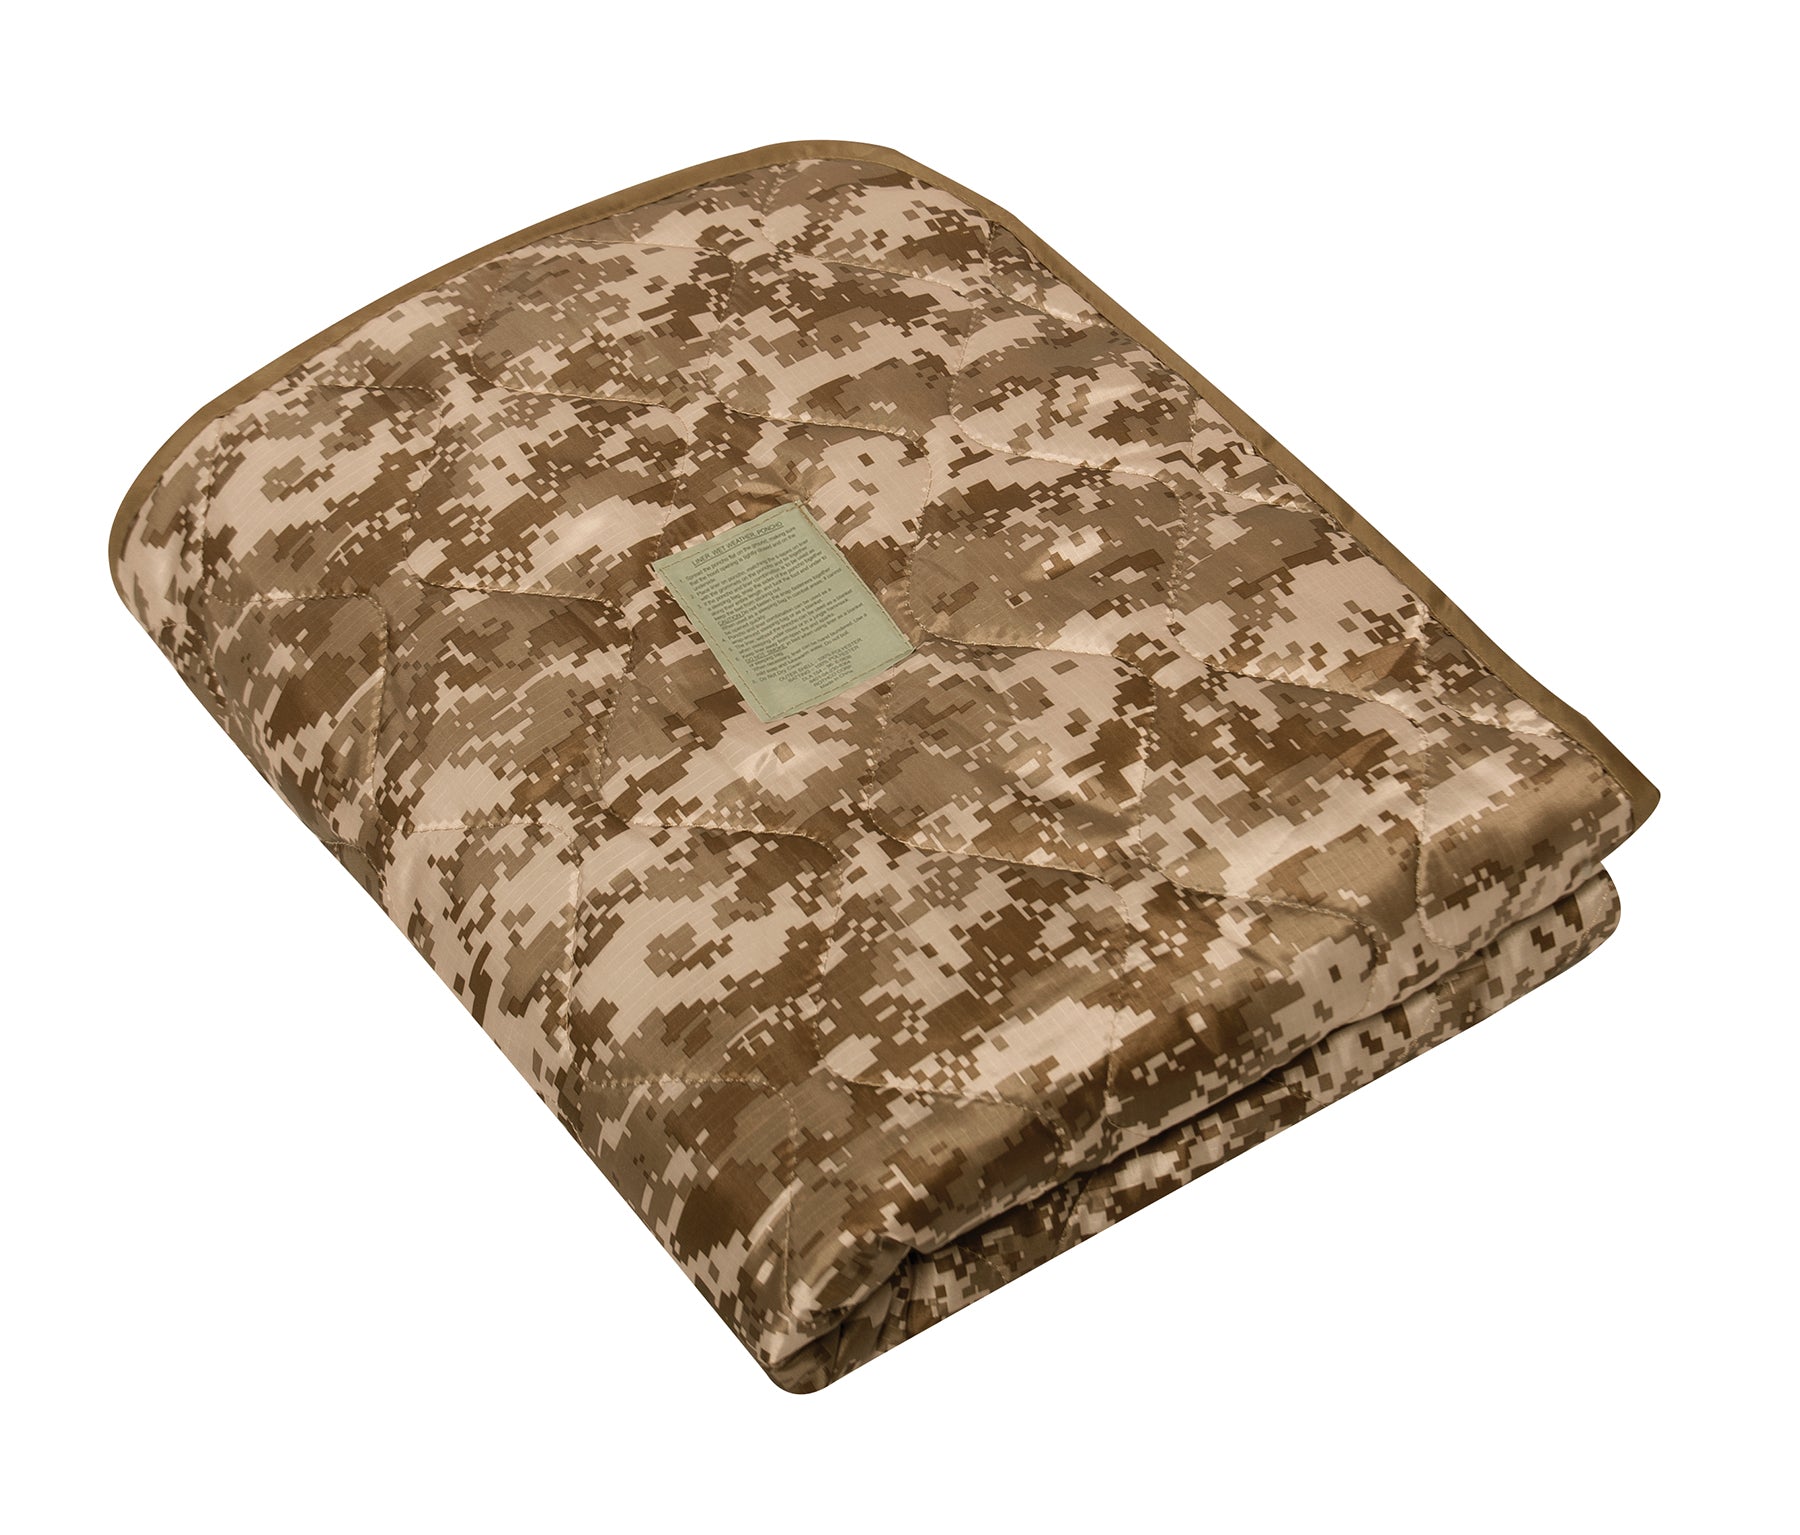 Milspec G.I. Type Camo Poncho Liner Emergency and Survival Blankets & Cots MilTac Tactical Military Outdoor Gear Australia